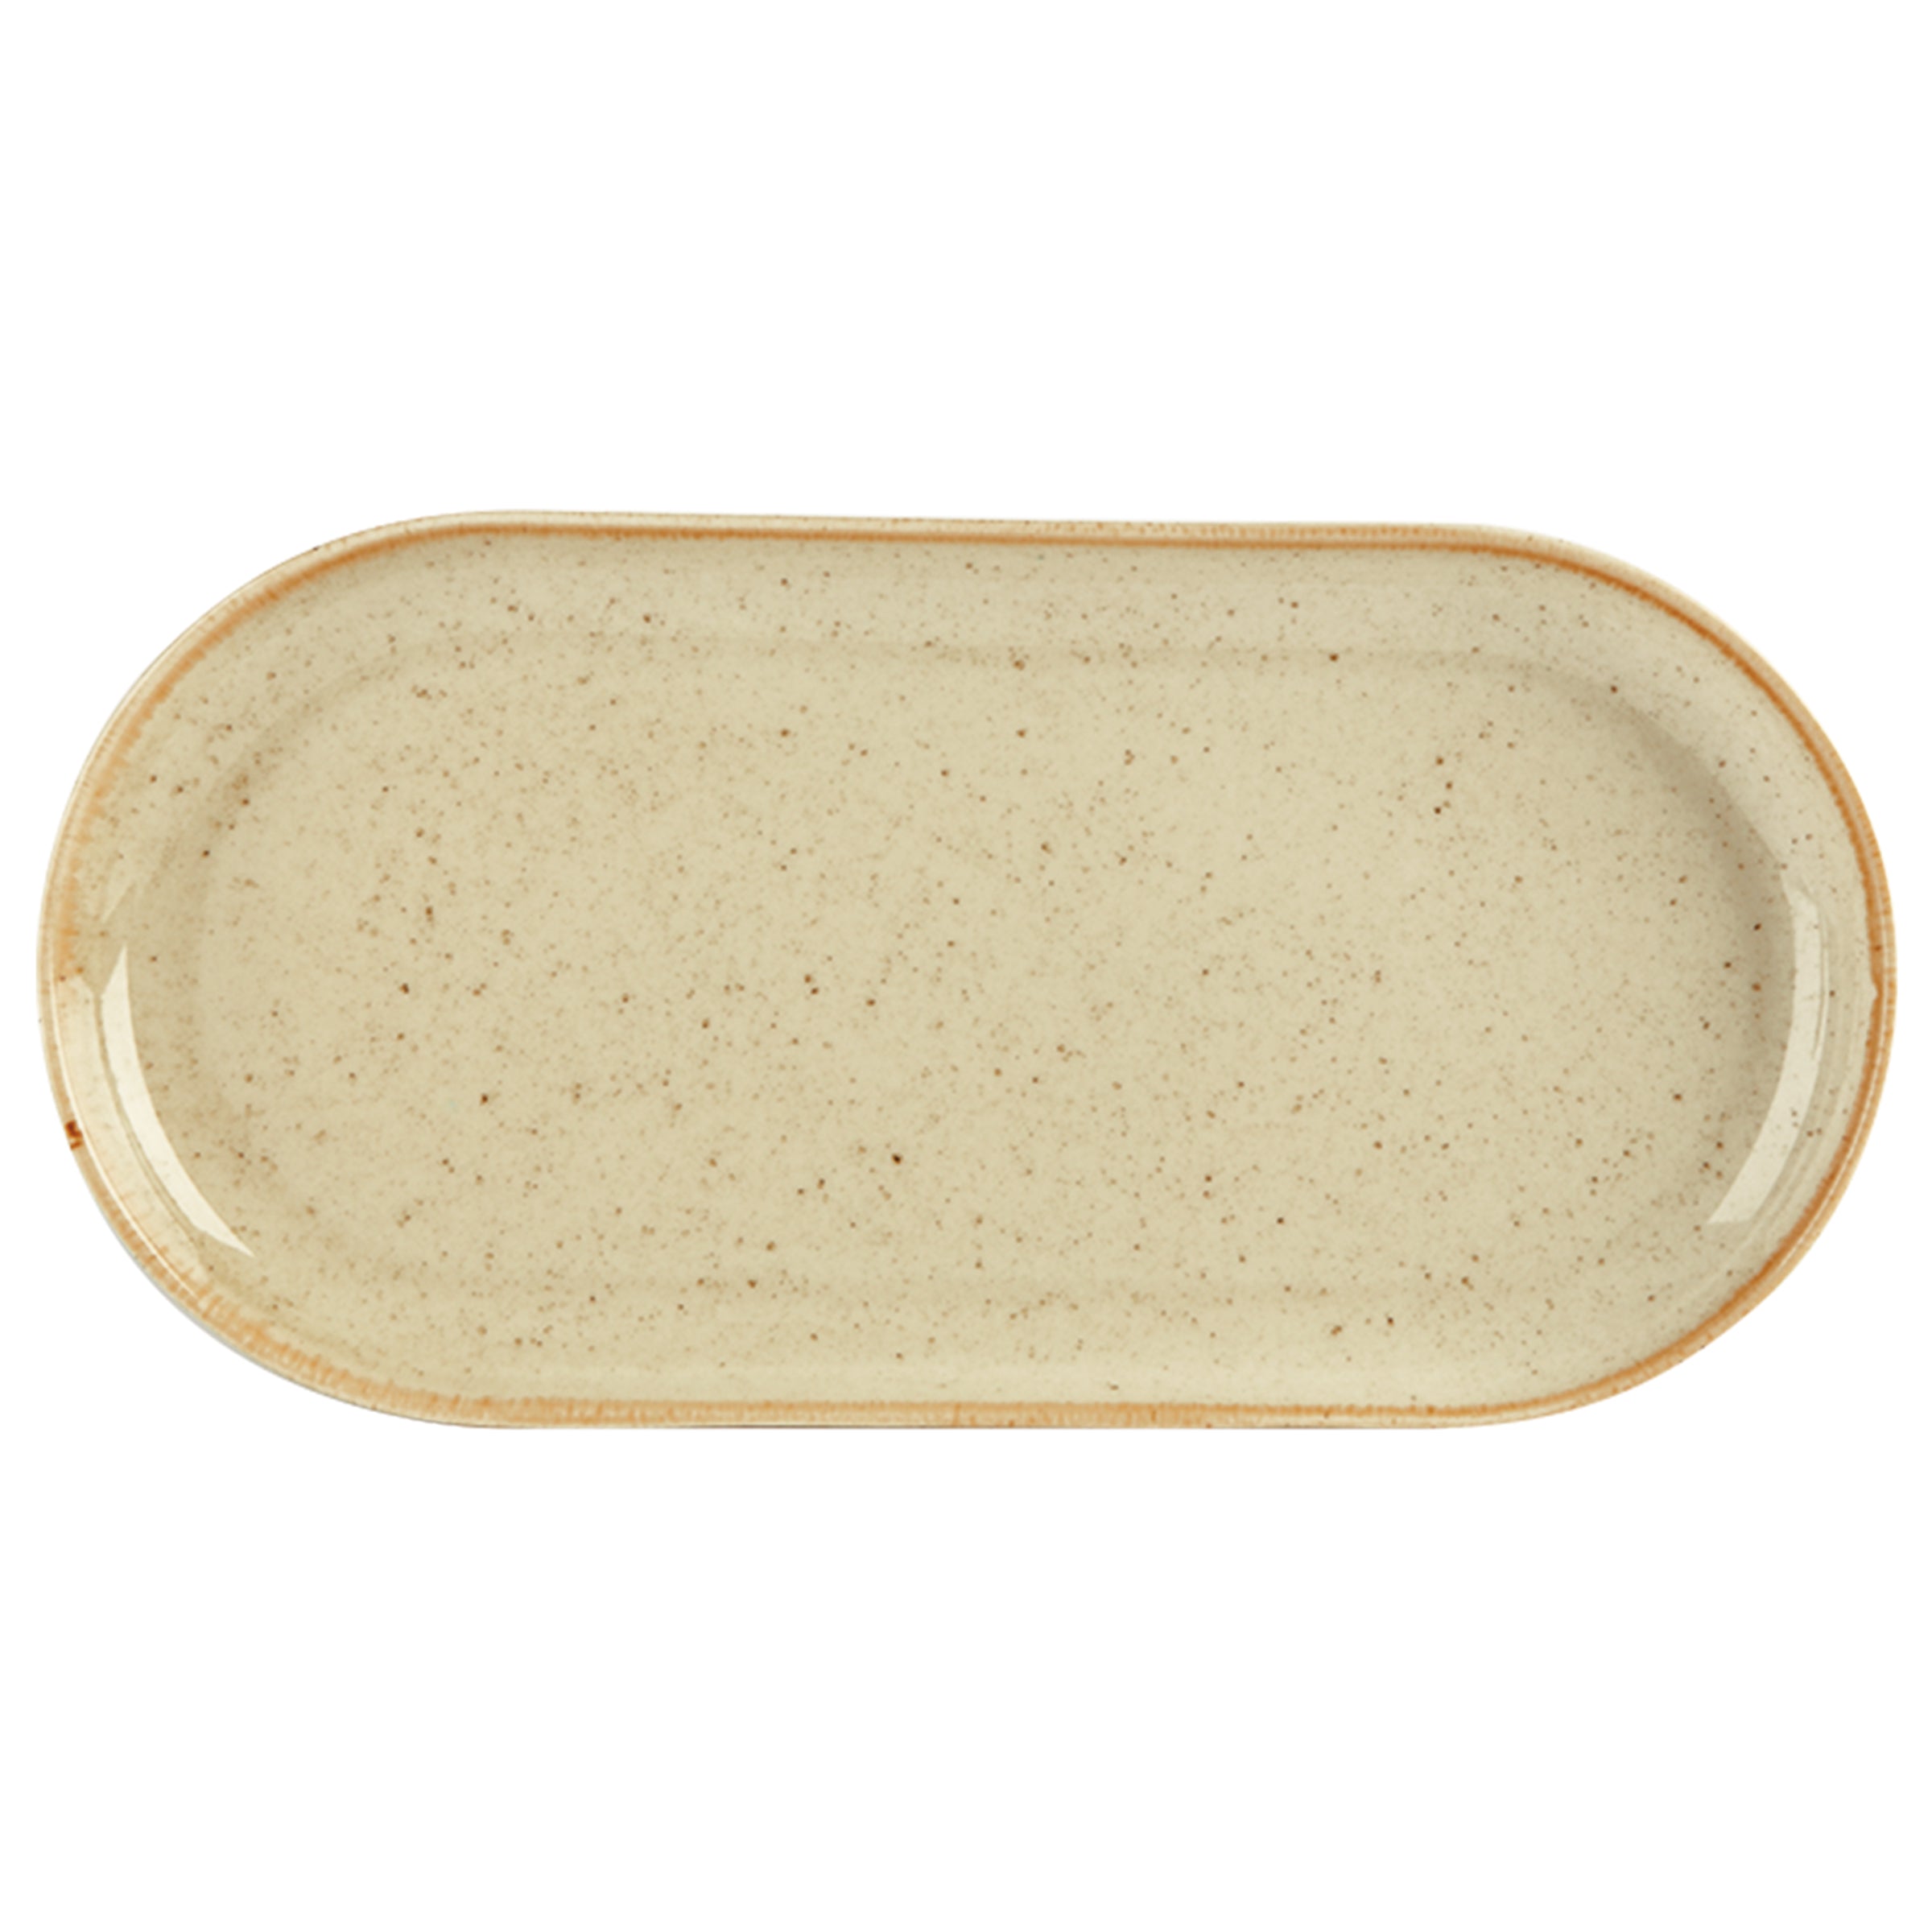 Seasons Wheat Narrow Oval Plate 30cm 118130WH Pack Size  6